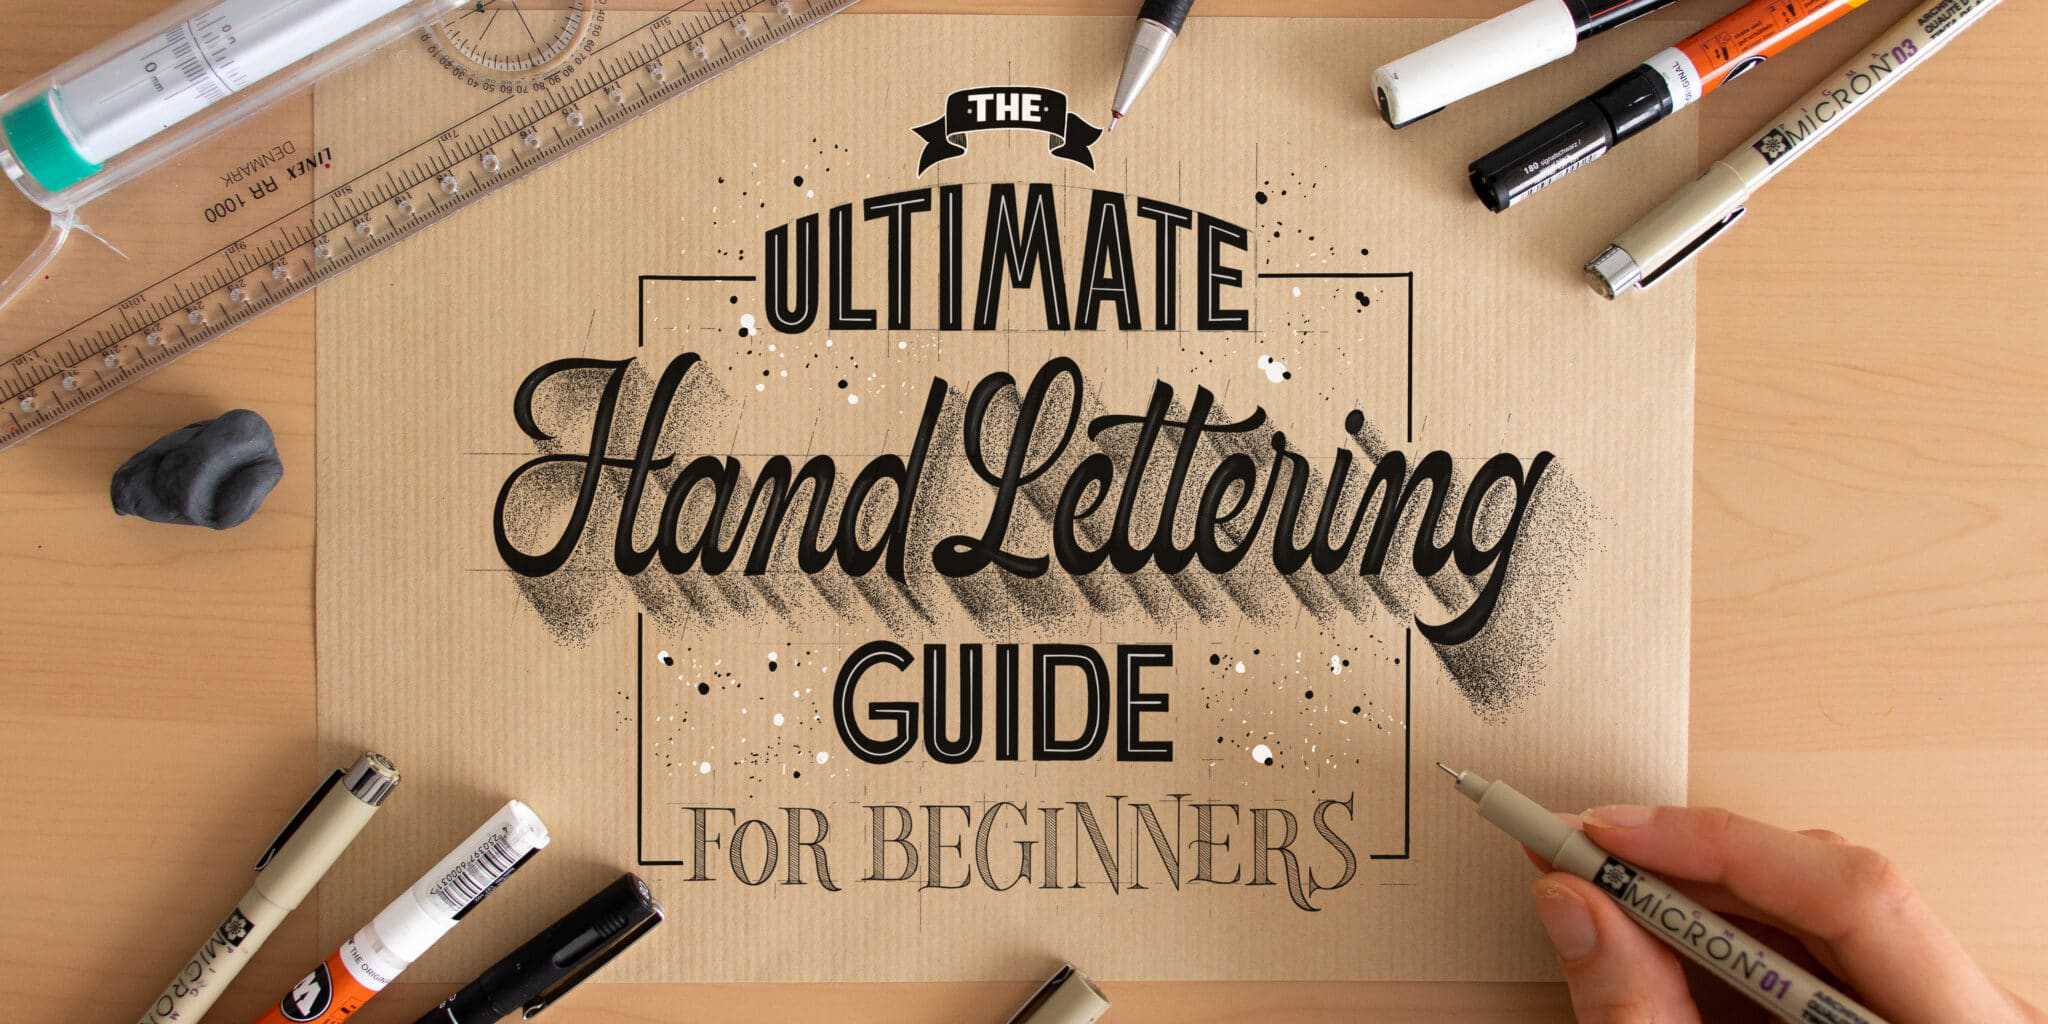 Hand lettering process: “Everything is an art project”